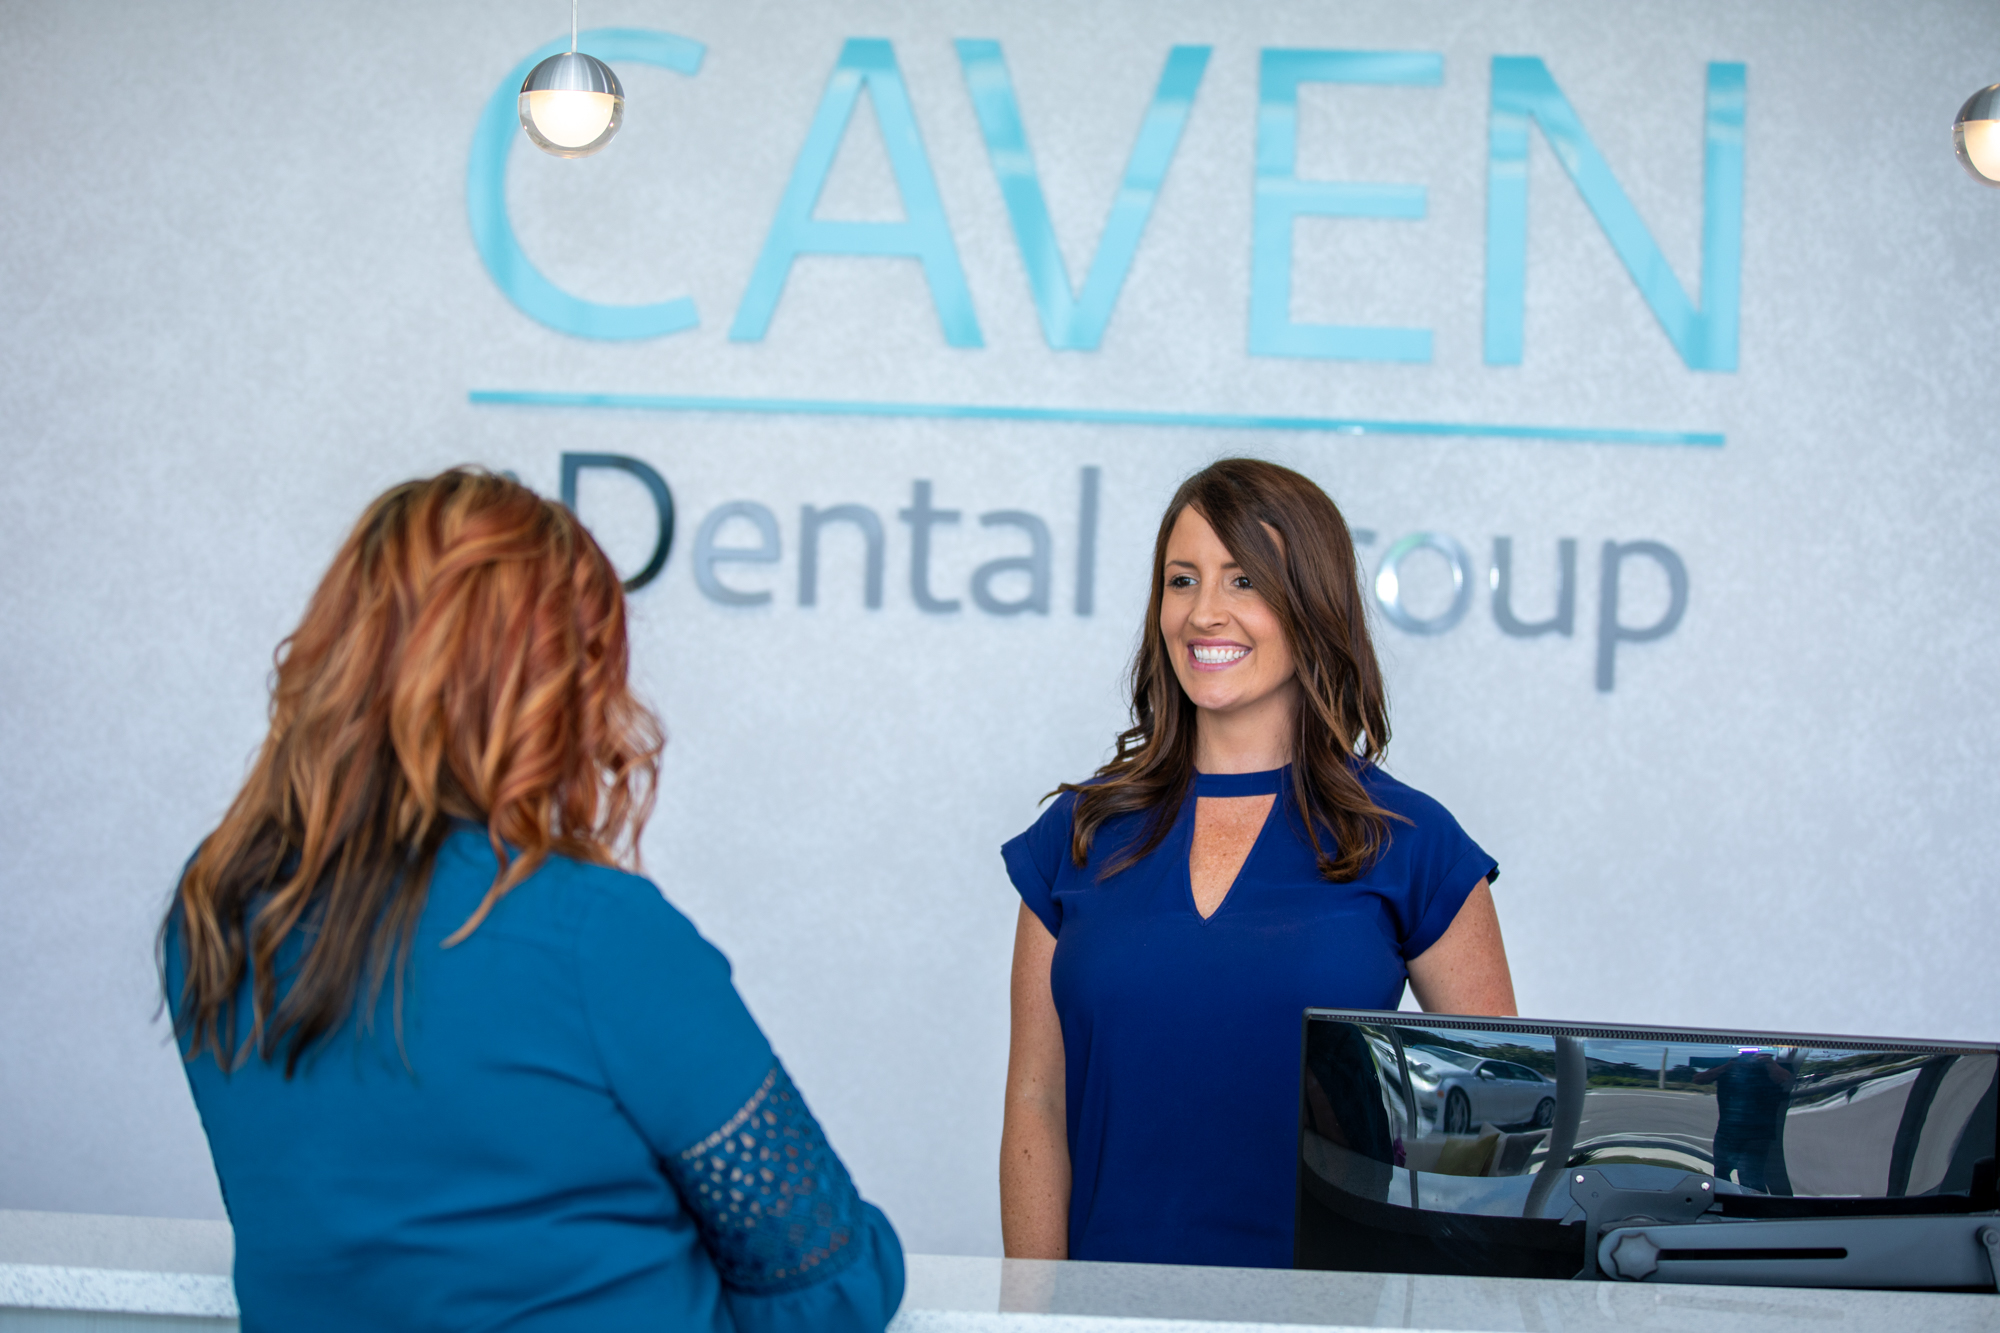 a patient setting up a porcelain veneers appointment with Dr. Caven's front desk lady in front of the practice logo.